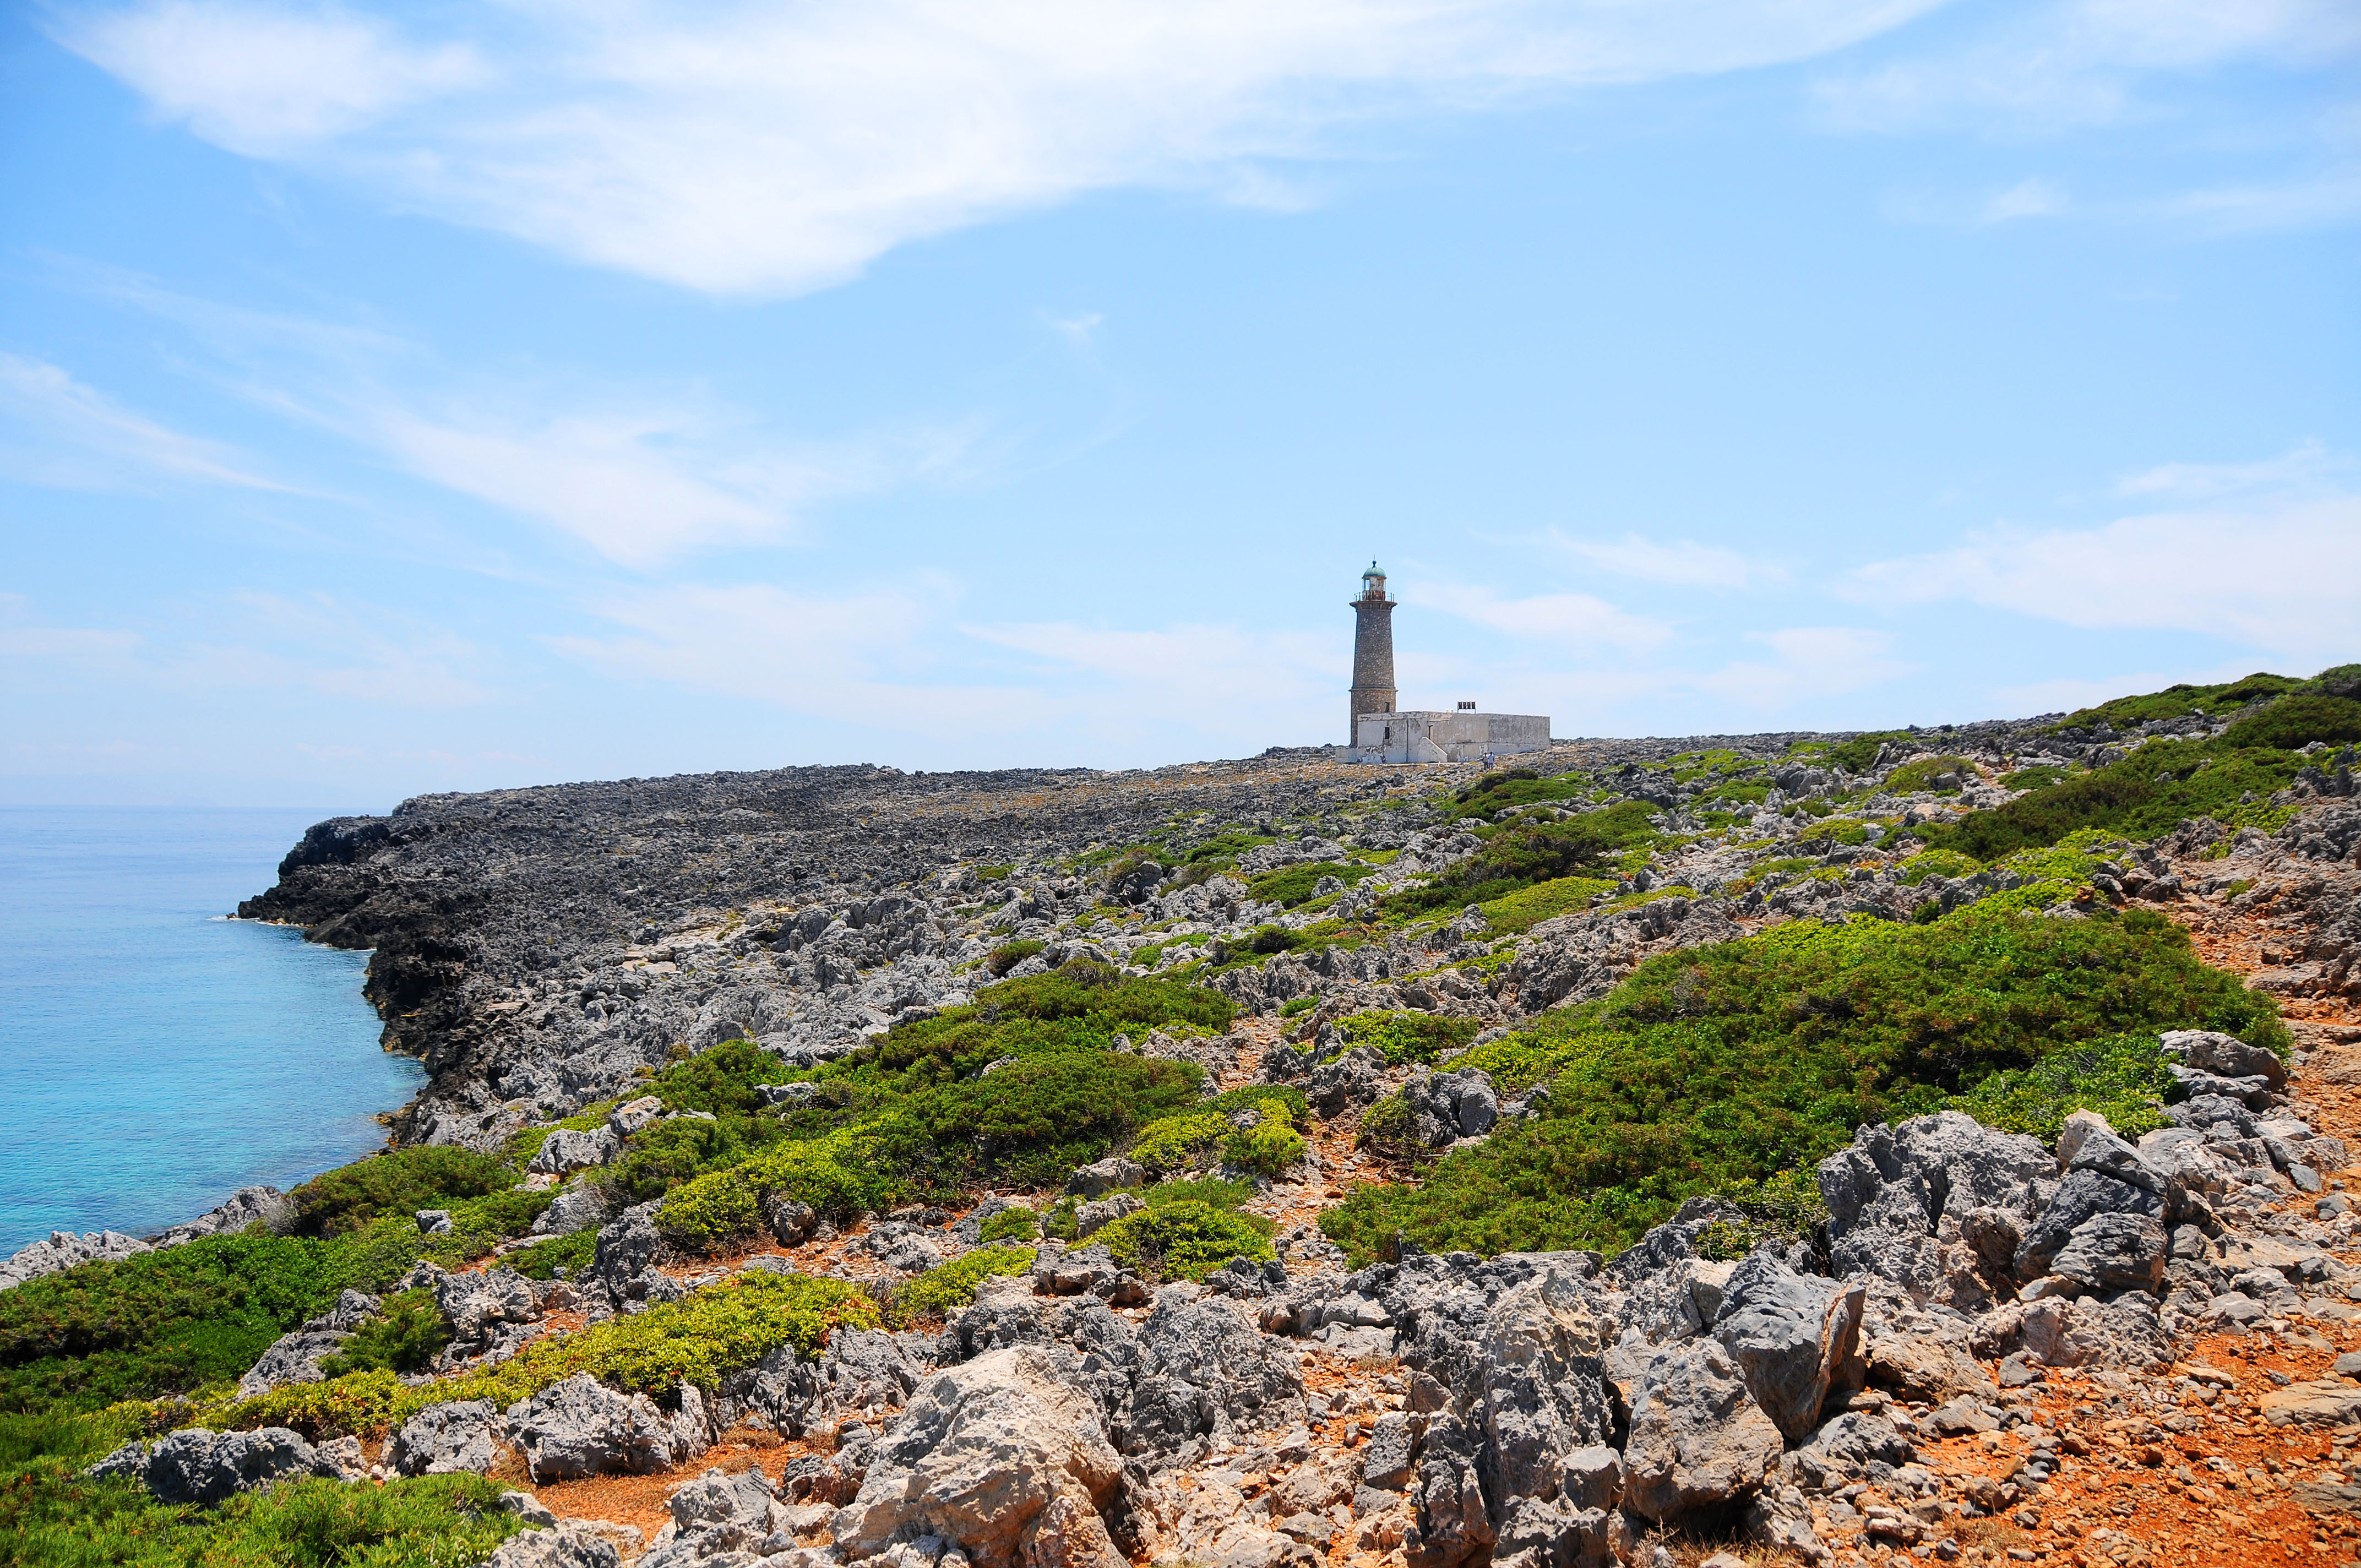 Anjci All Over | Antikythira: A forgotten island in the outskirts of the Aegean